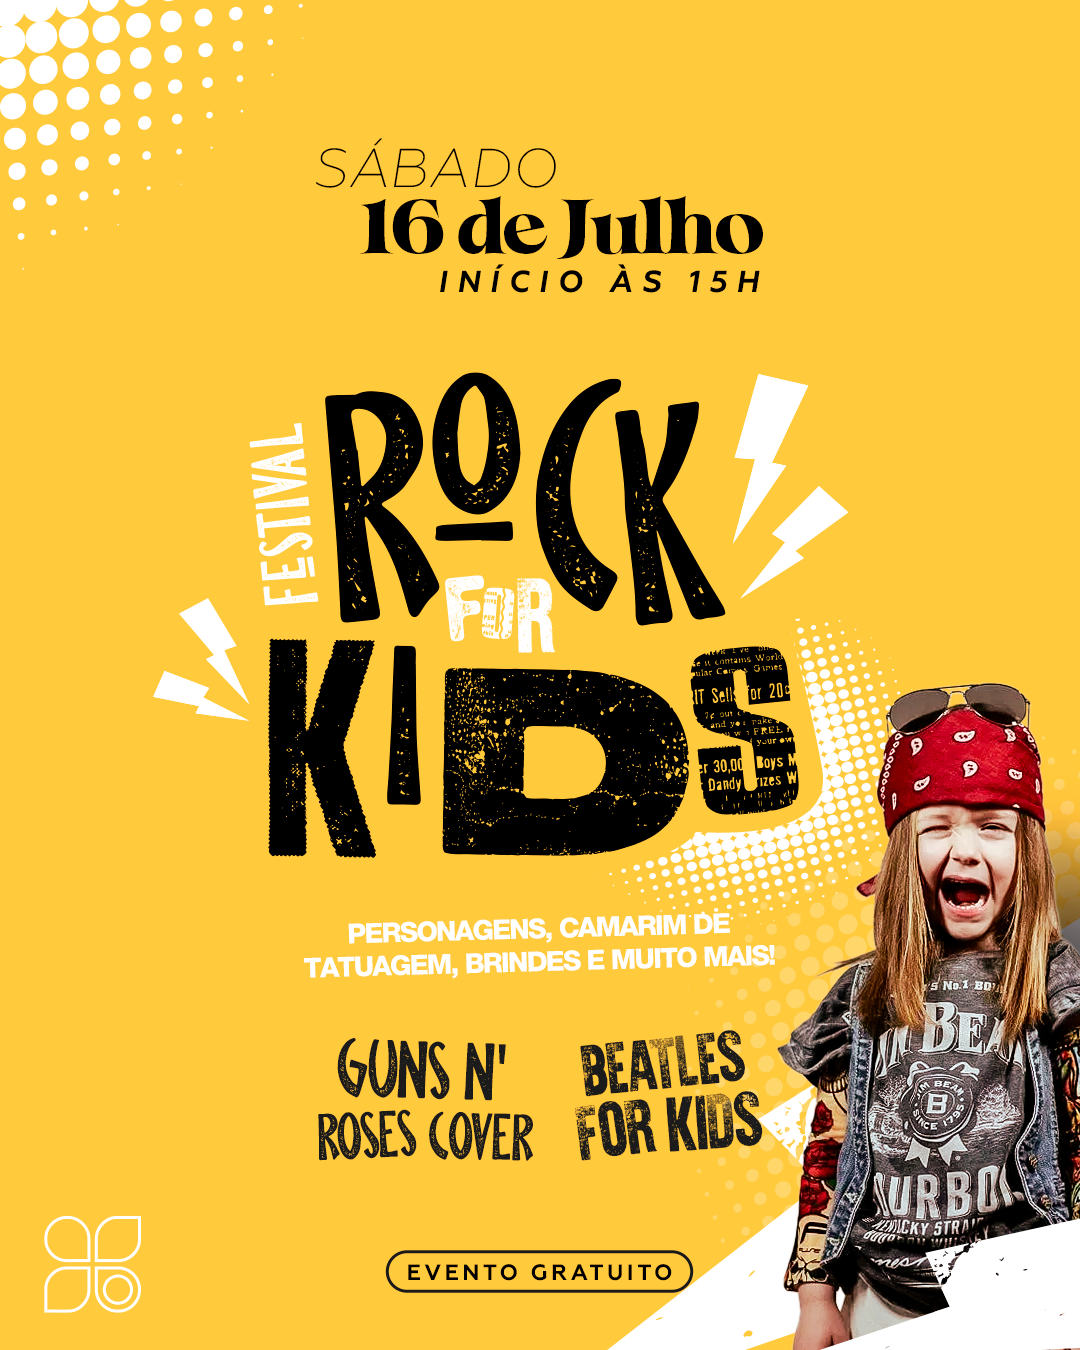 Rock for Kids